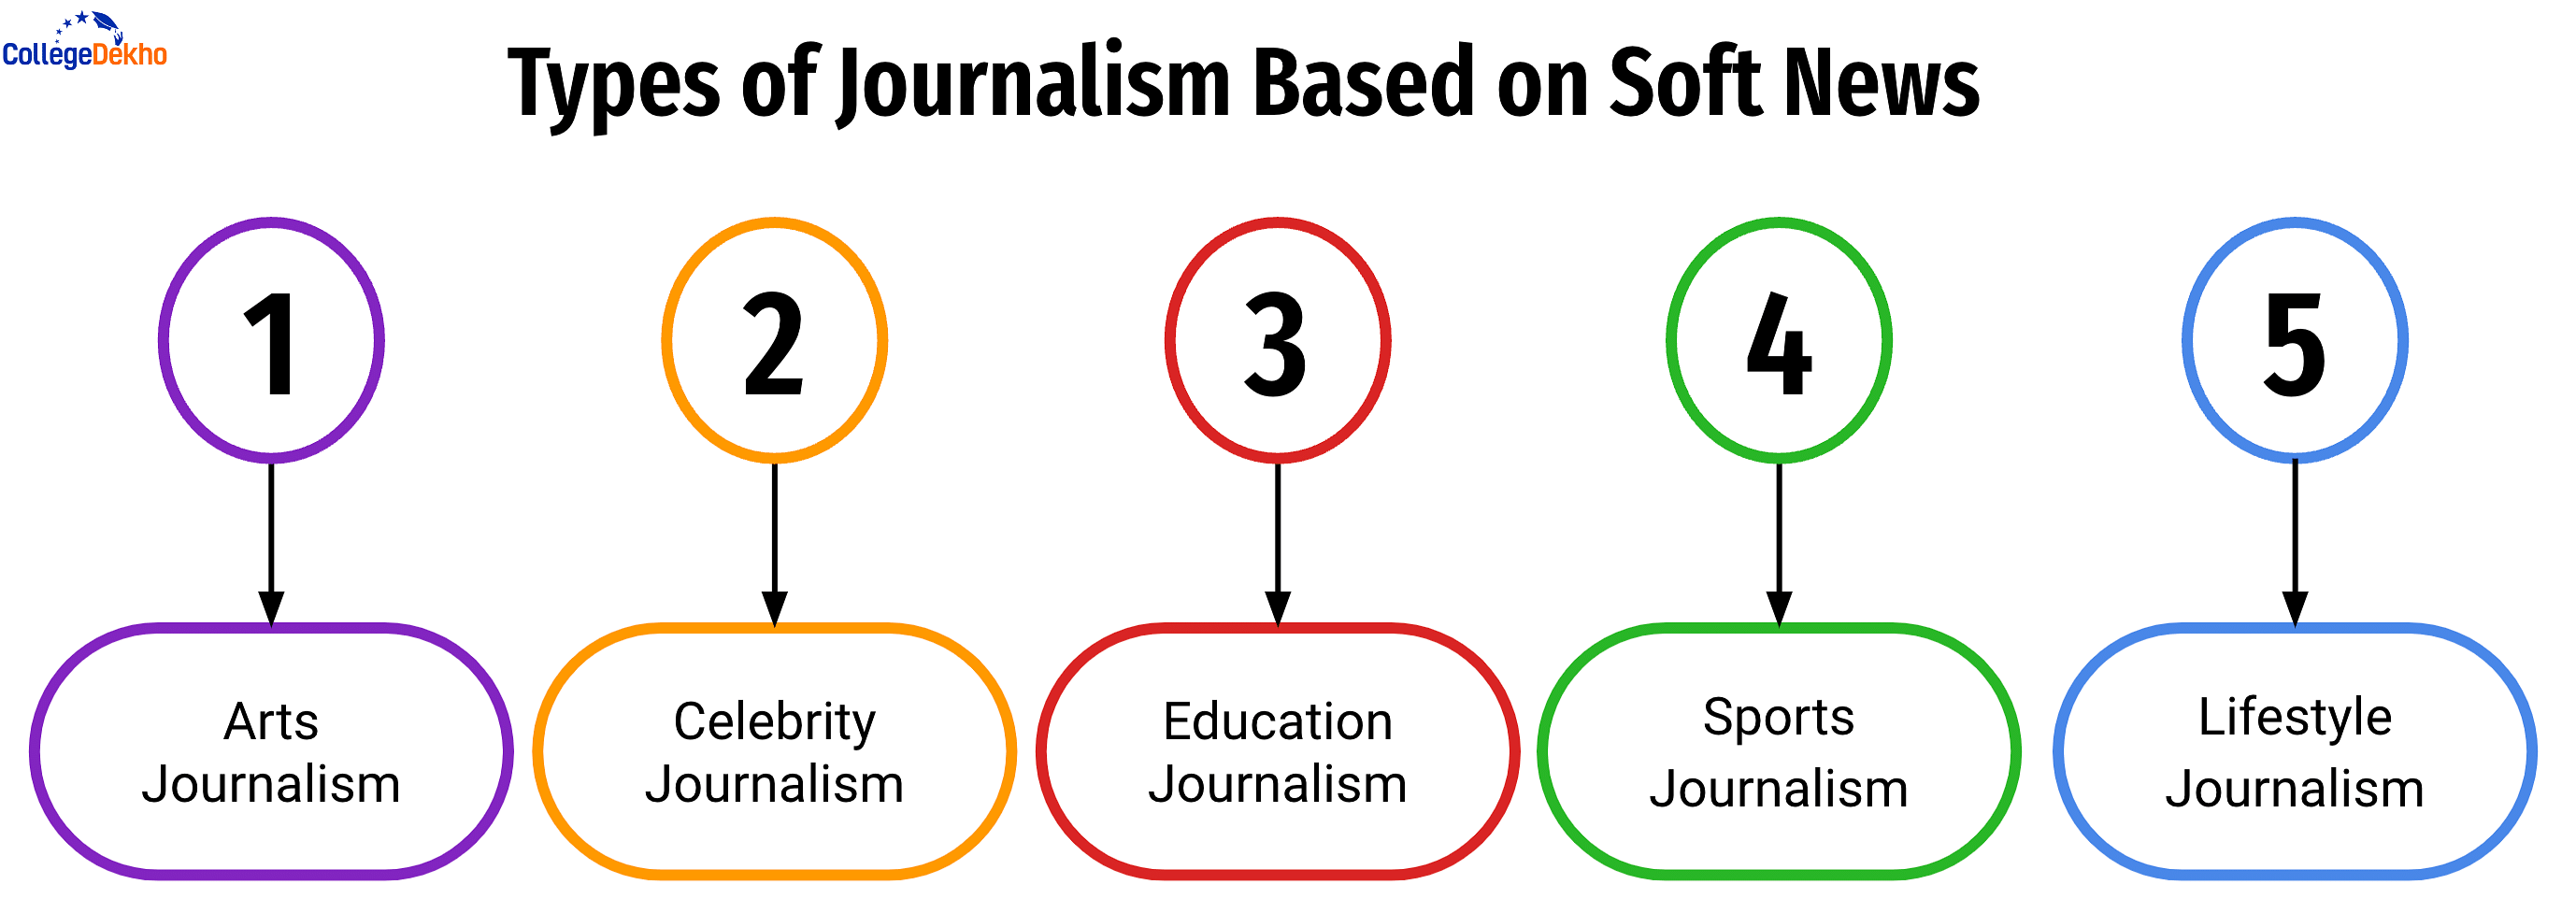 Types of Journalism Based on Soft News